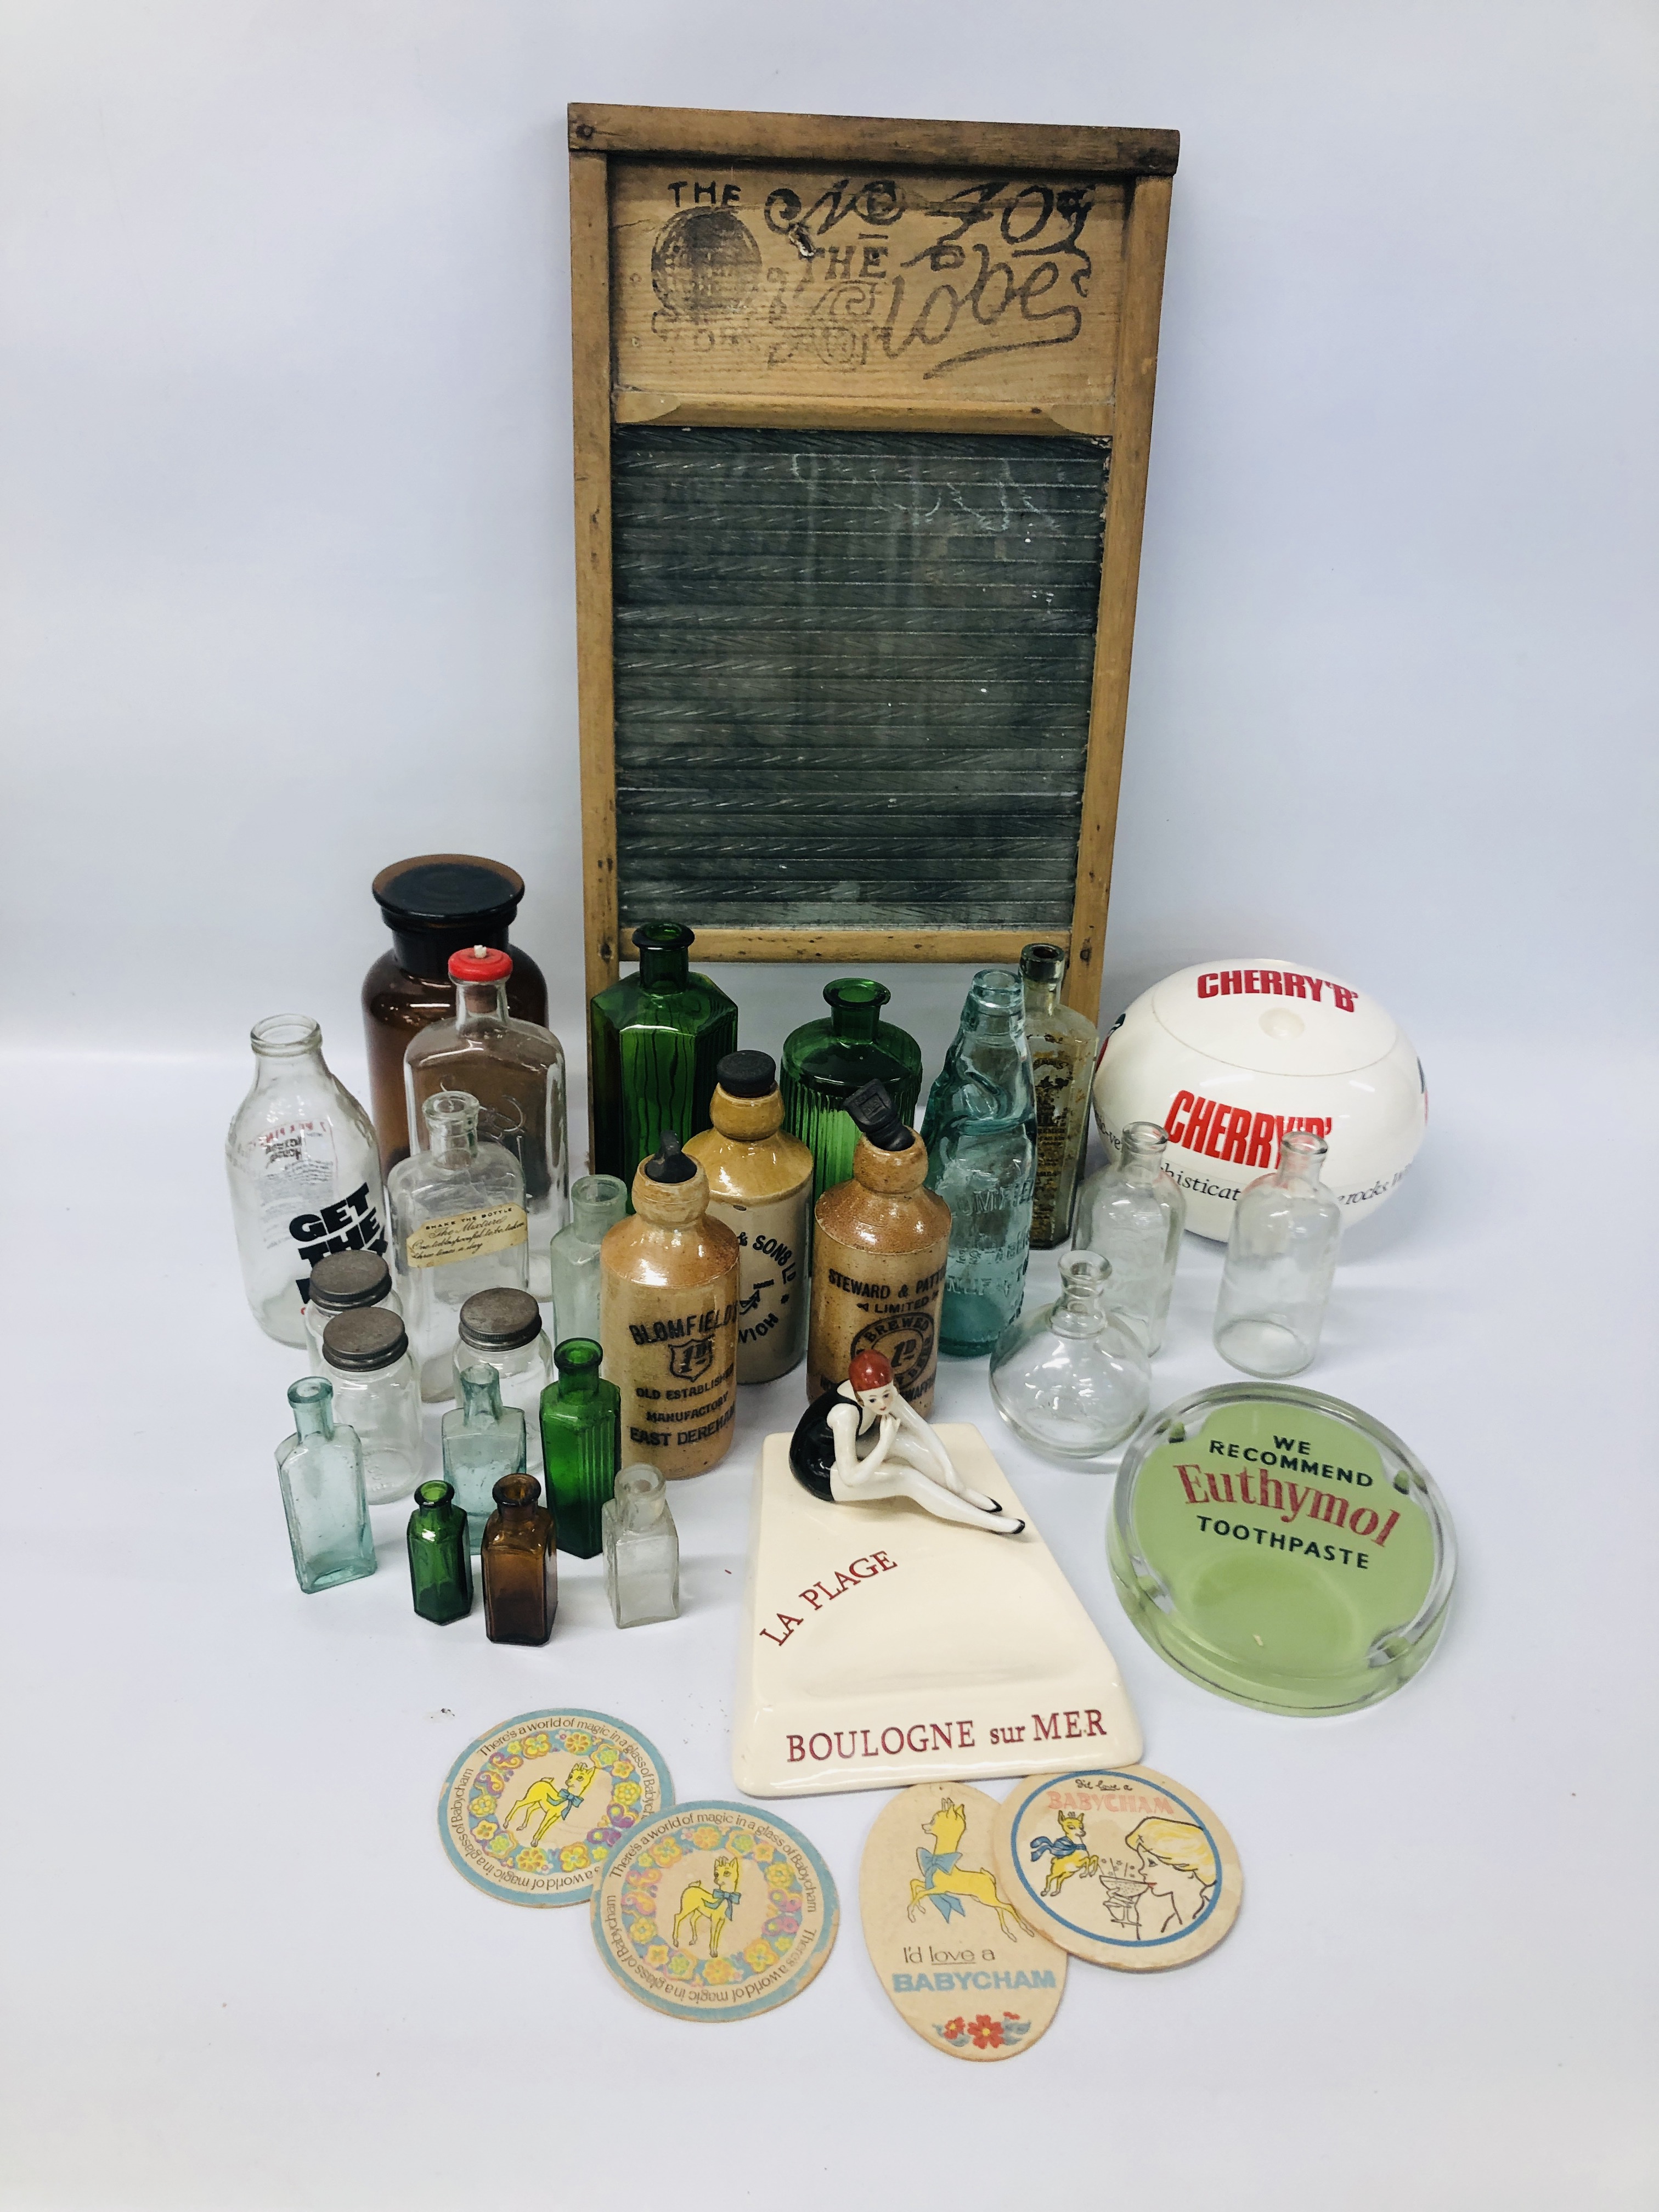 A SMALL COLLECTION OF ANTIQUE GLASS BOTTLES INCLUDING ALLY, MILK, MEDICINE, ETC.